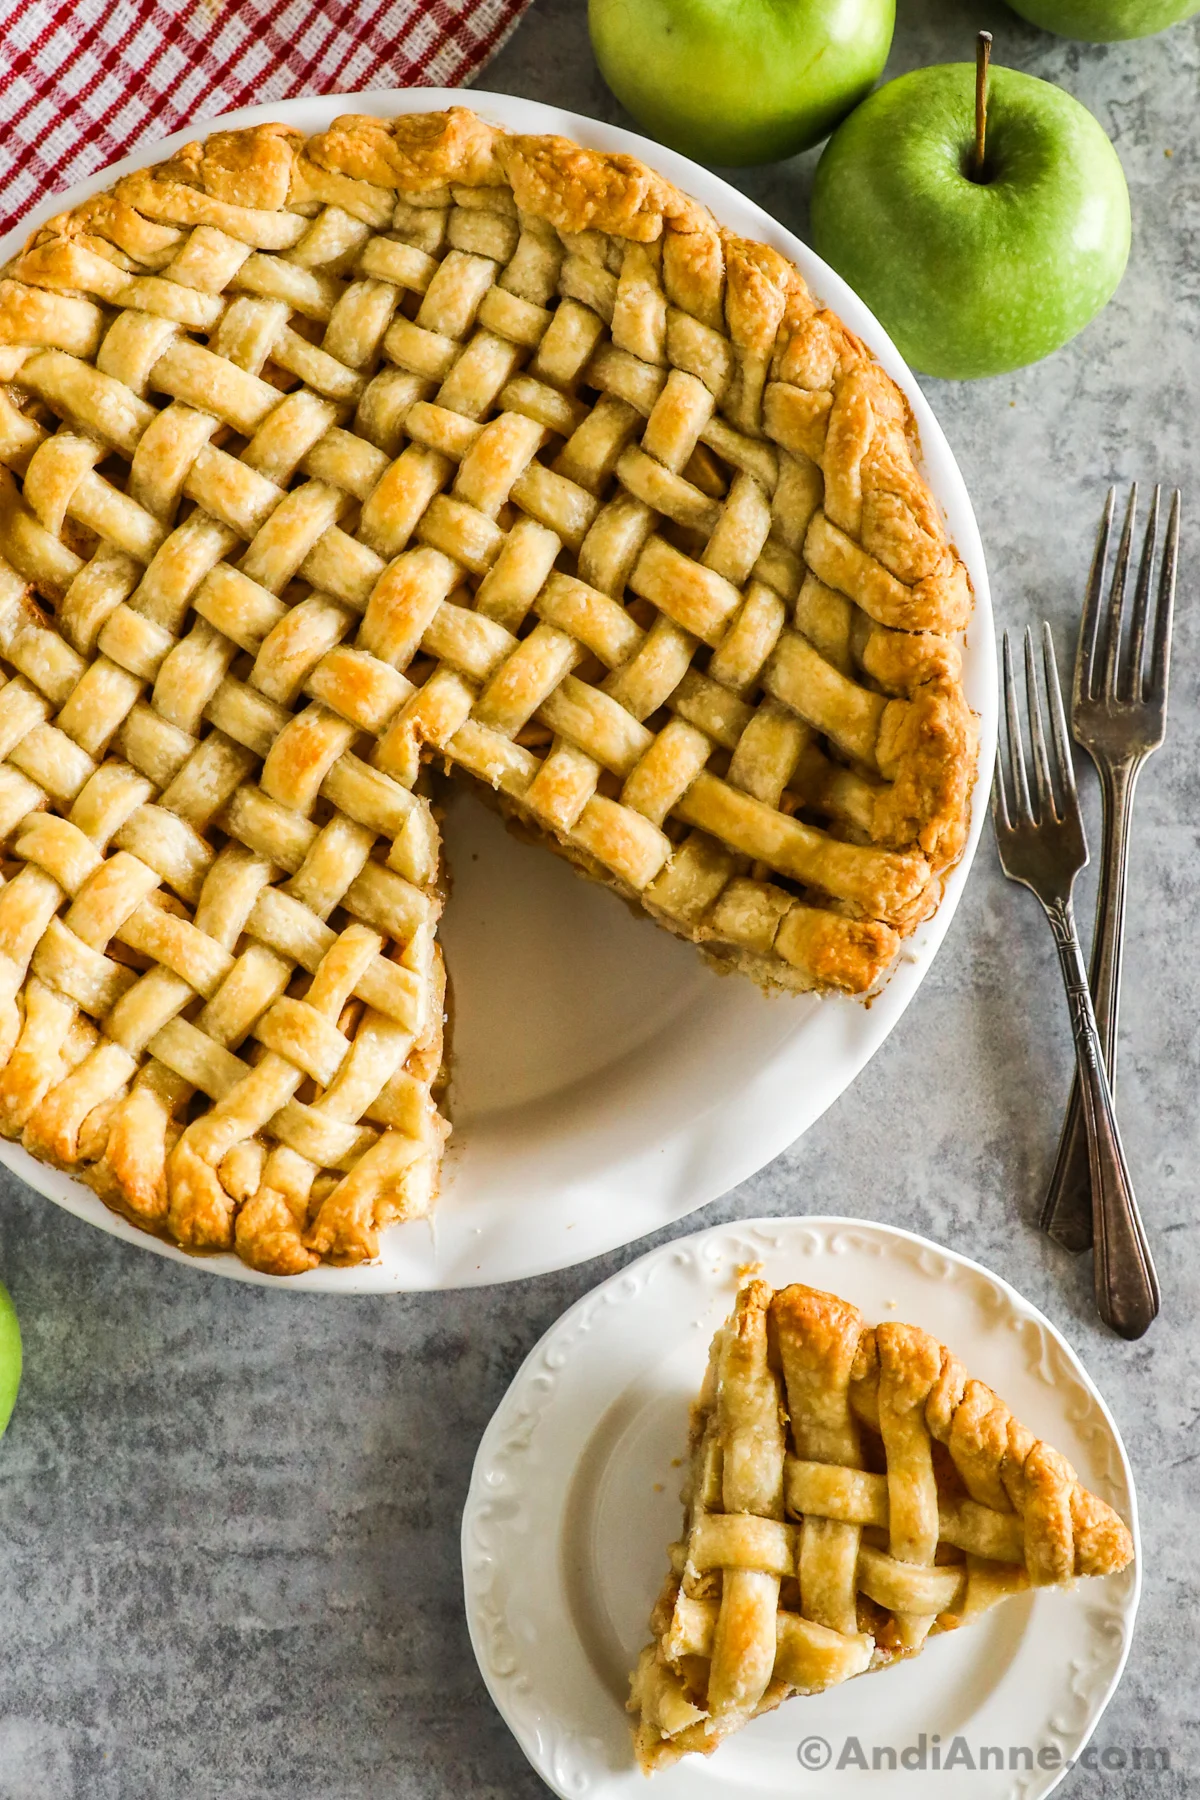 A slice cut out of lattice crust pie in white pie dish with two forks. Pie slice on plate.